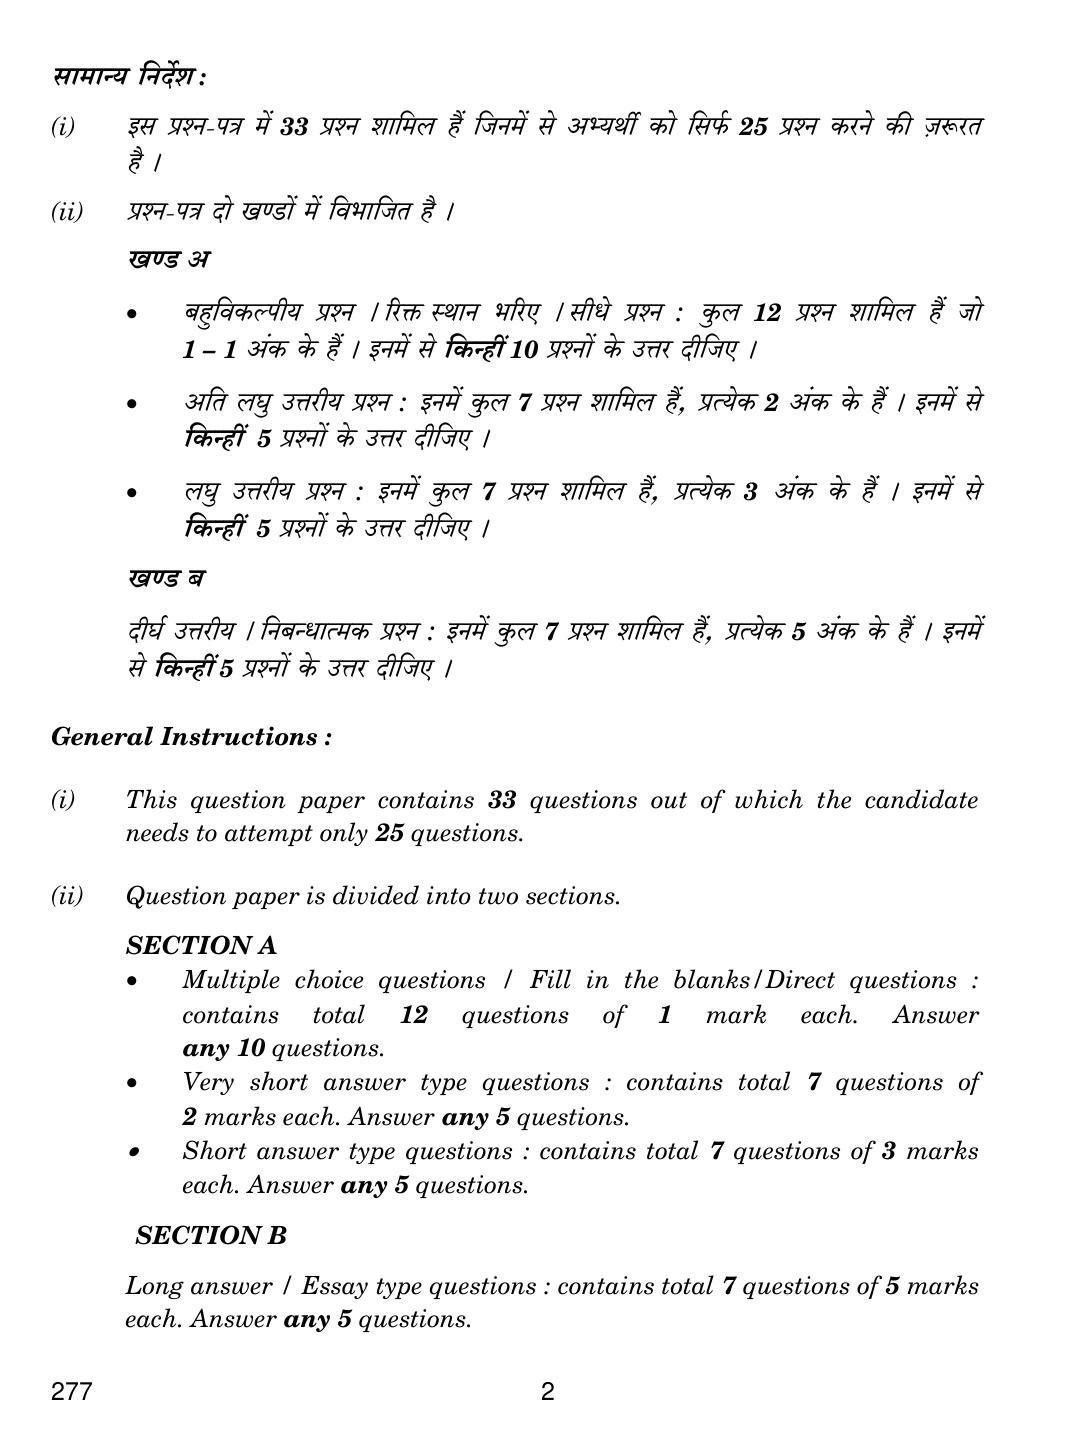 CBSE Class 12 277 Front Office Operations 2019 Question Paper - Page 2